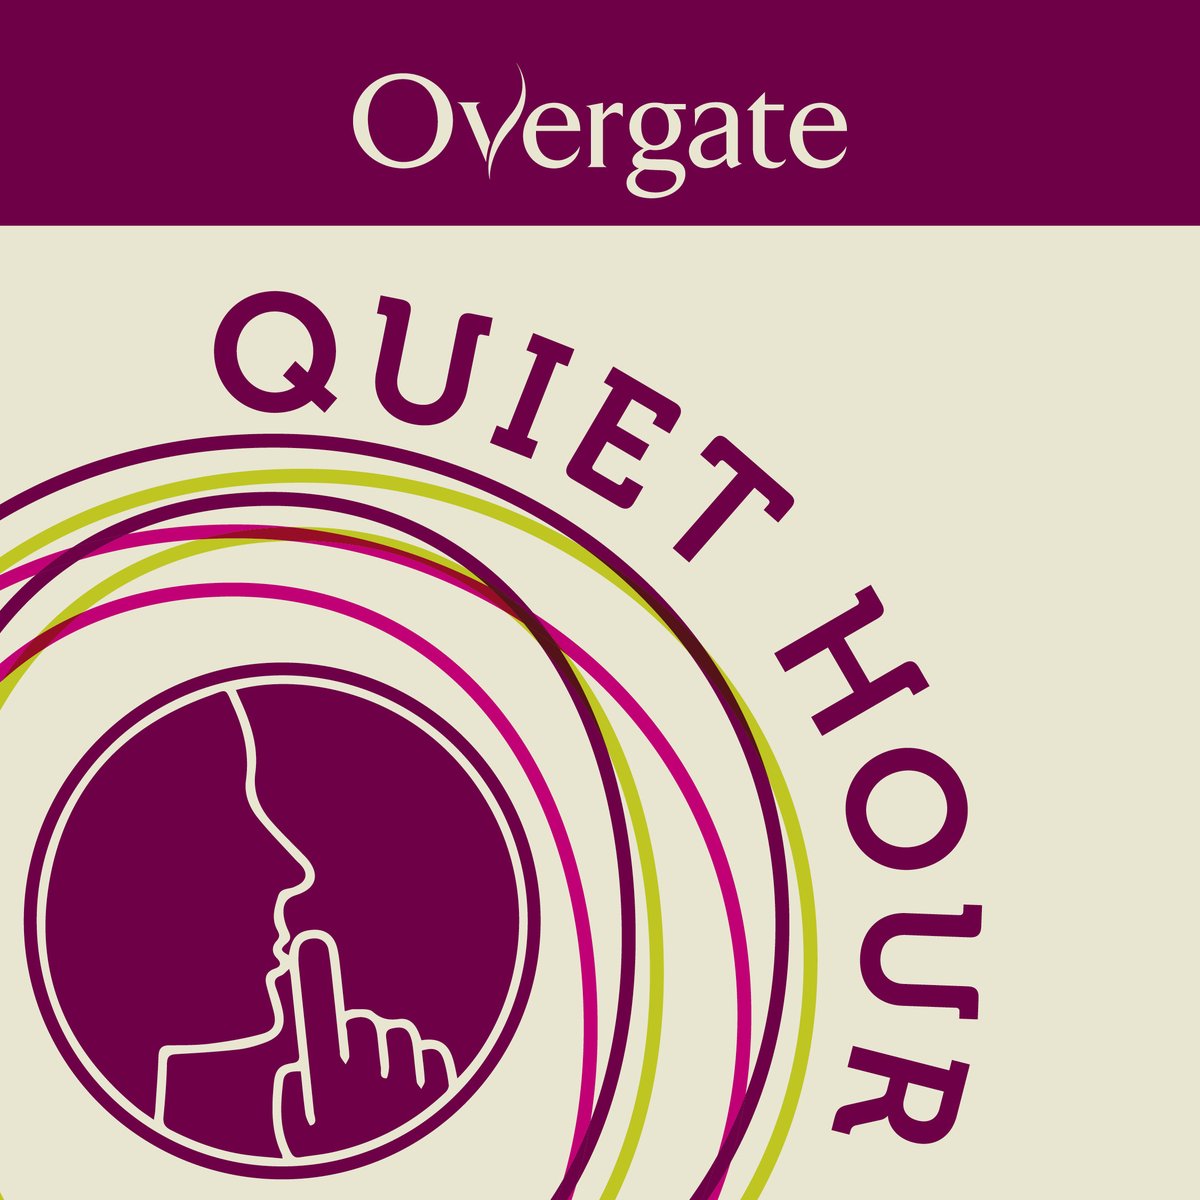 Did you know...every Monday to Saturday 9am – 10am and every Sunday 11am – 12pm, we host a quiet hour in the centre. During this hour, music is switched off and lighting is adjusted where possible. #Overgate #Dundee #QuietHour #Shopping #AccessibilityForAll